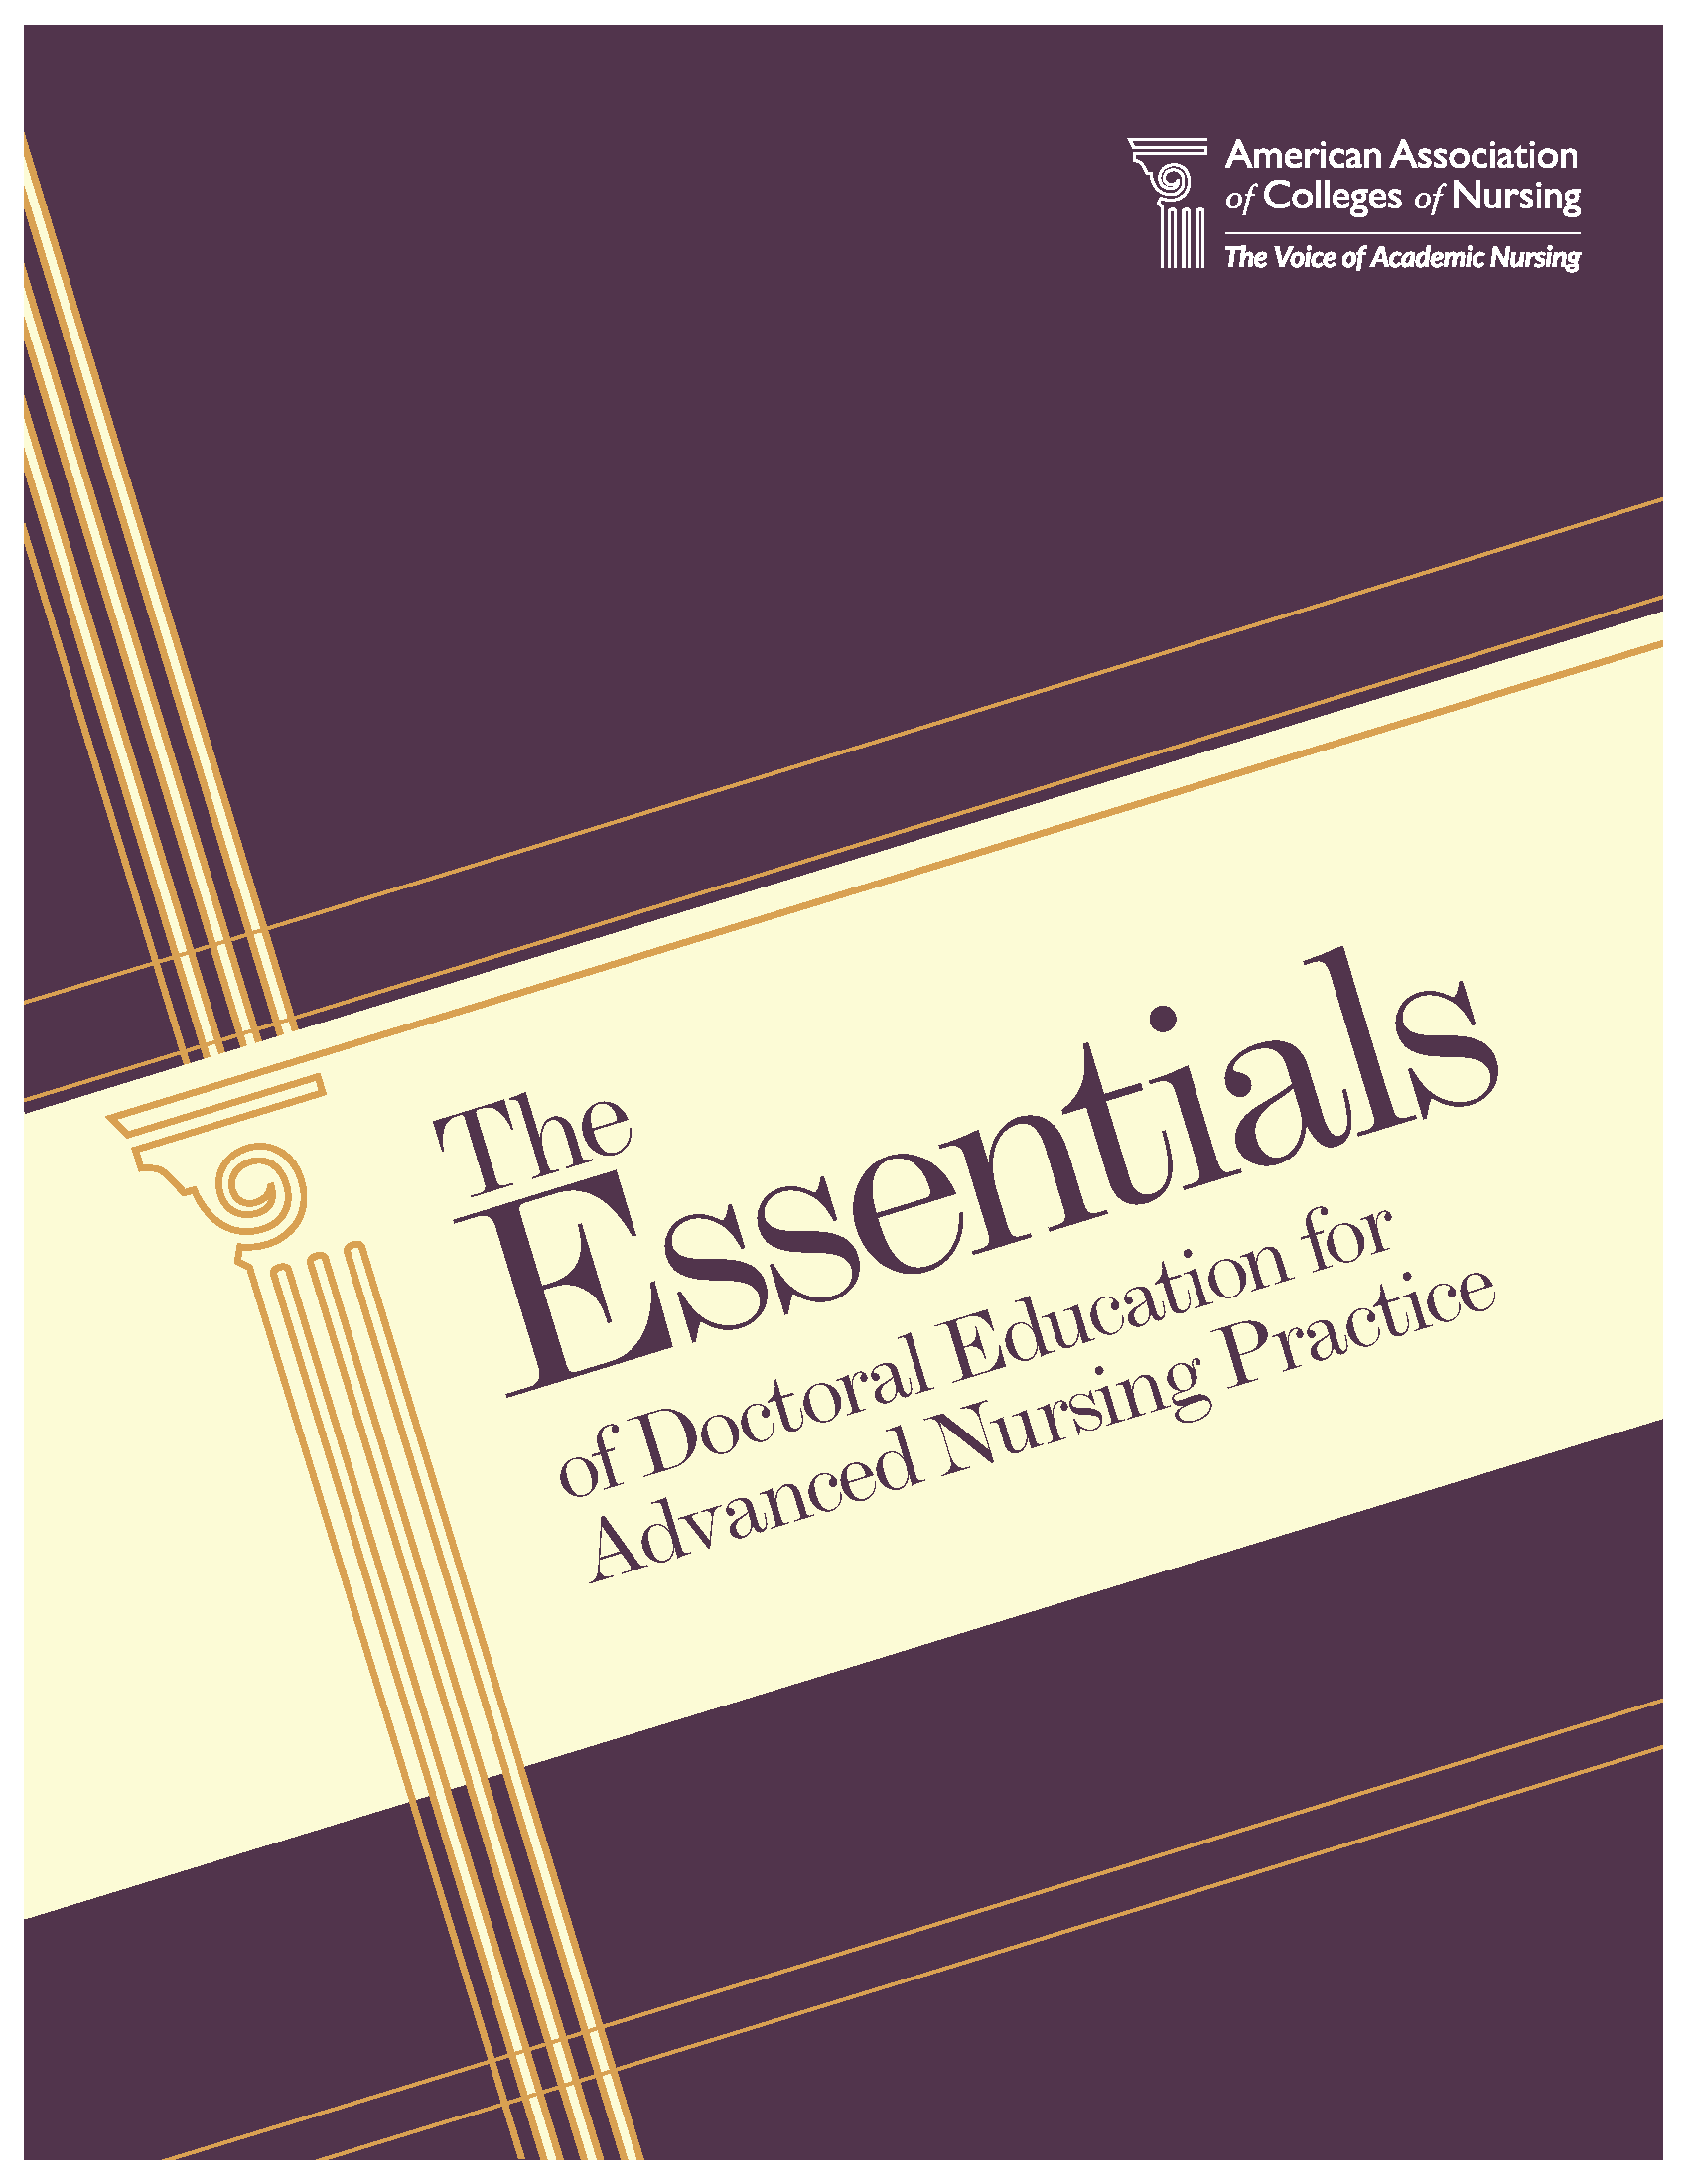 cover of 2006 essentials of doctoral education for advanced nursing practice